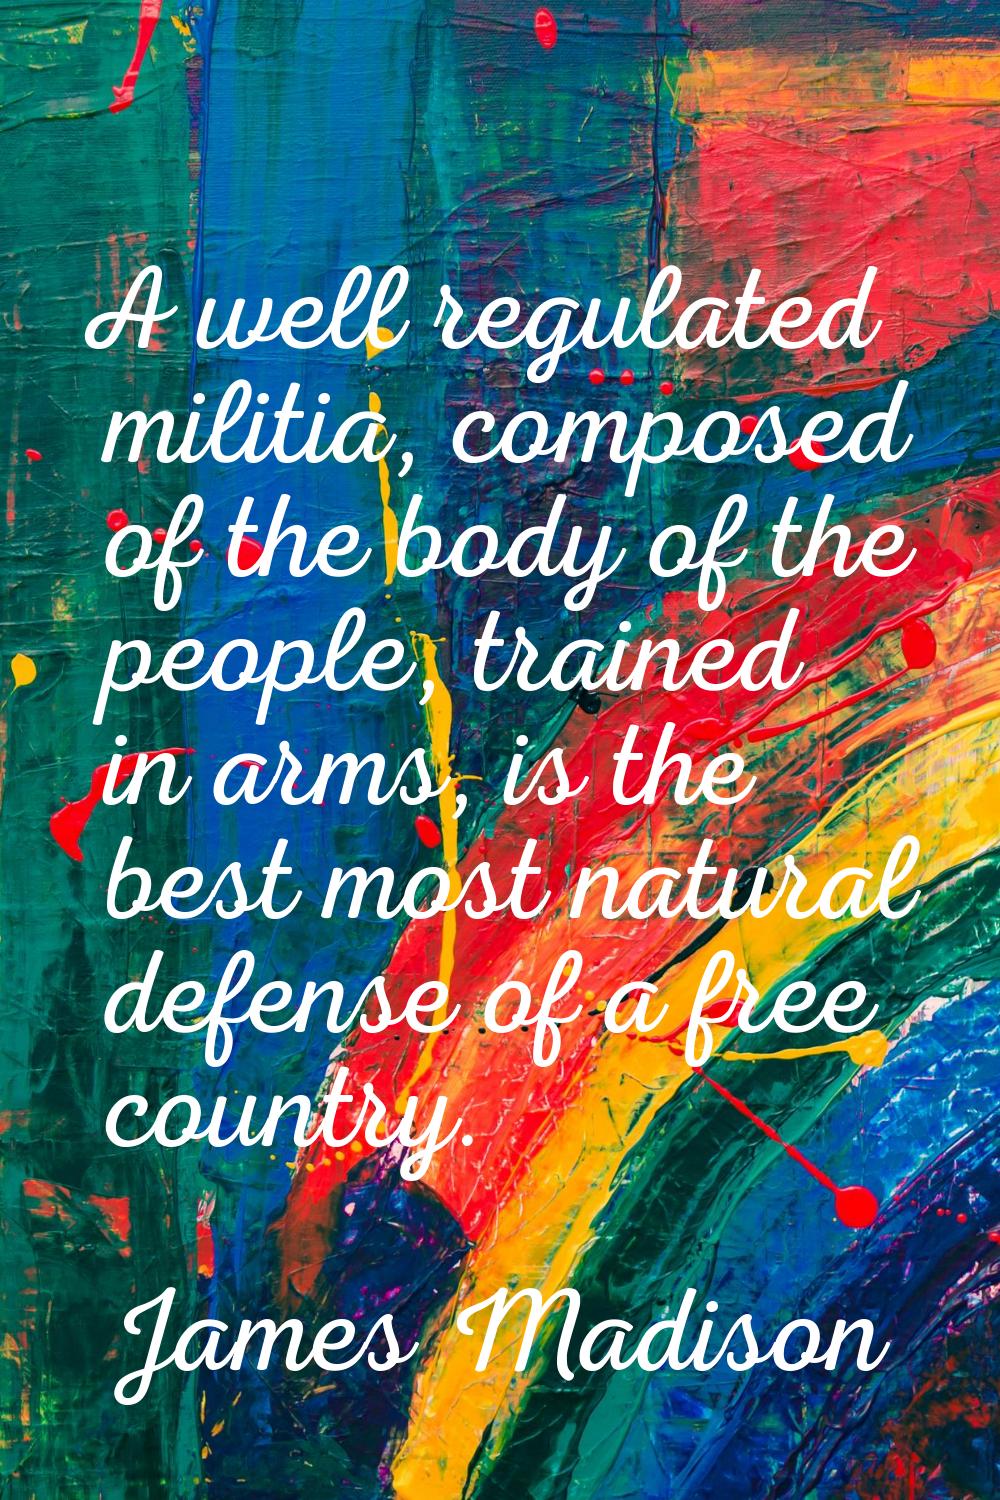 A well regulated militia, composed of the body of the people, trained in arms, is the best most nat